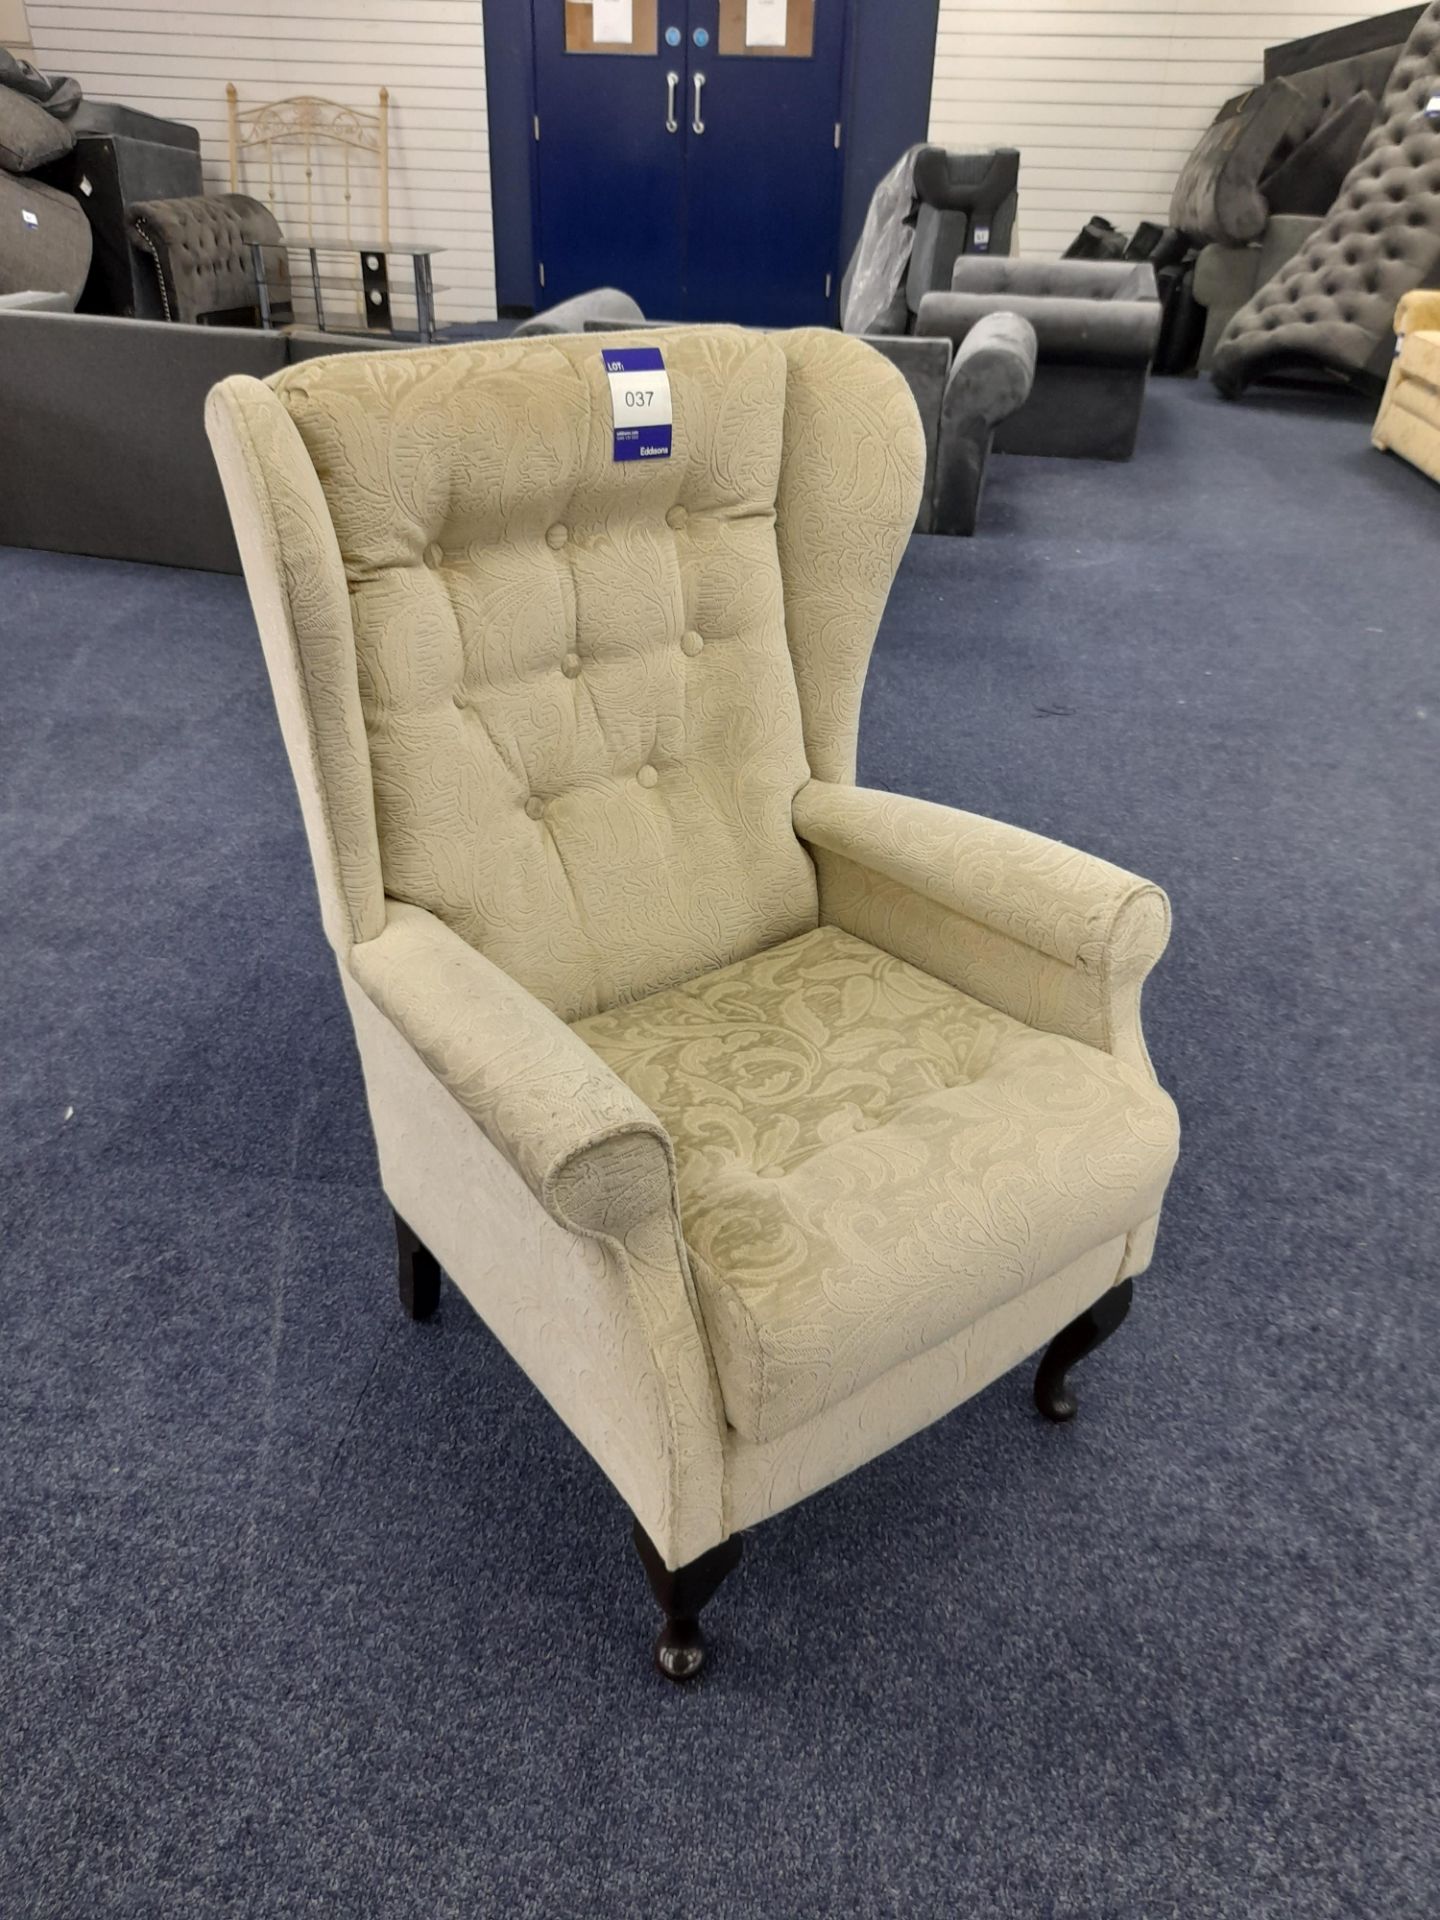 Cream fabric upholstered high back armchair (Ex-Display) - Image 2 of 3